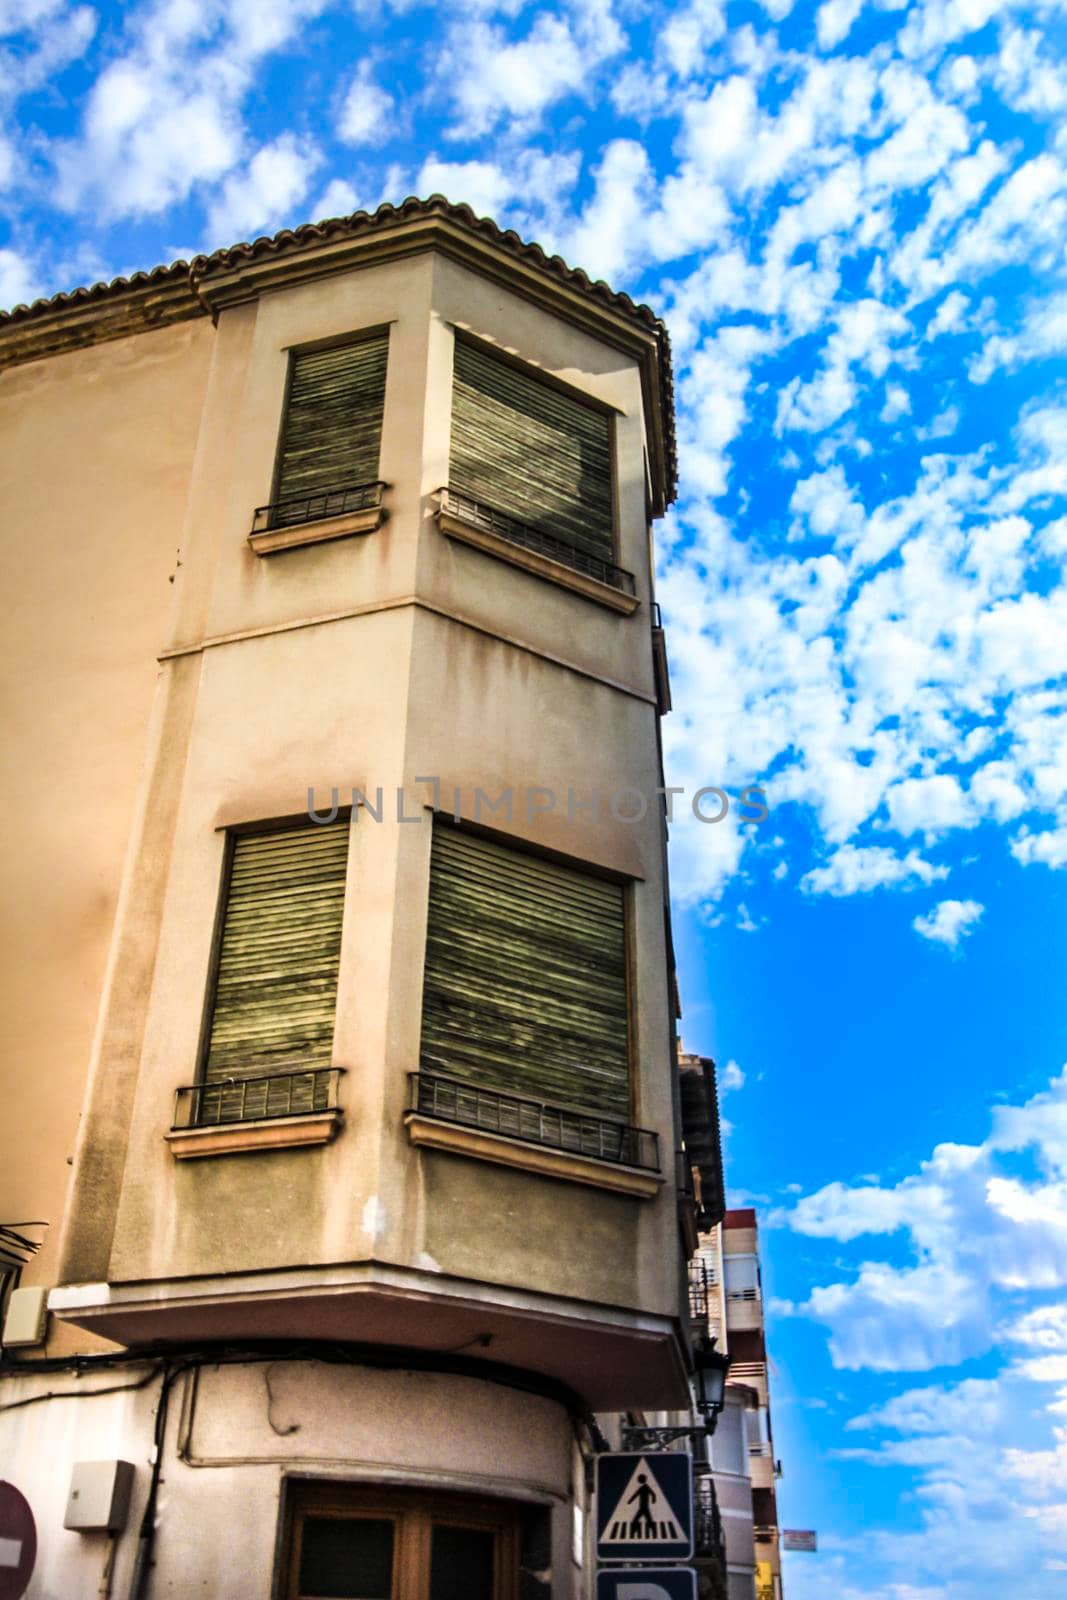 Old facade with wooden green blinds under beautiful sky in Novelda, Alicante, Spain